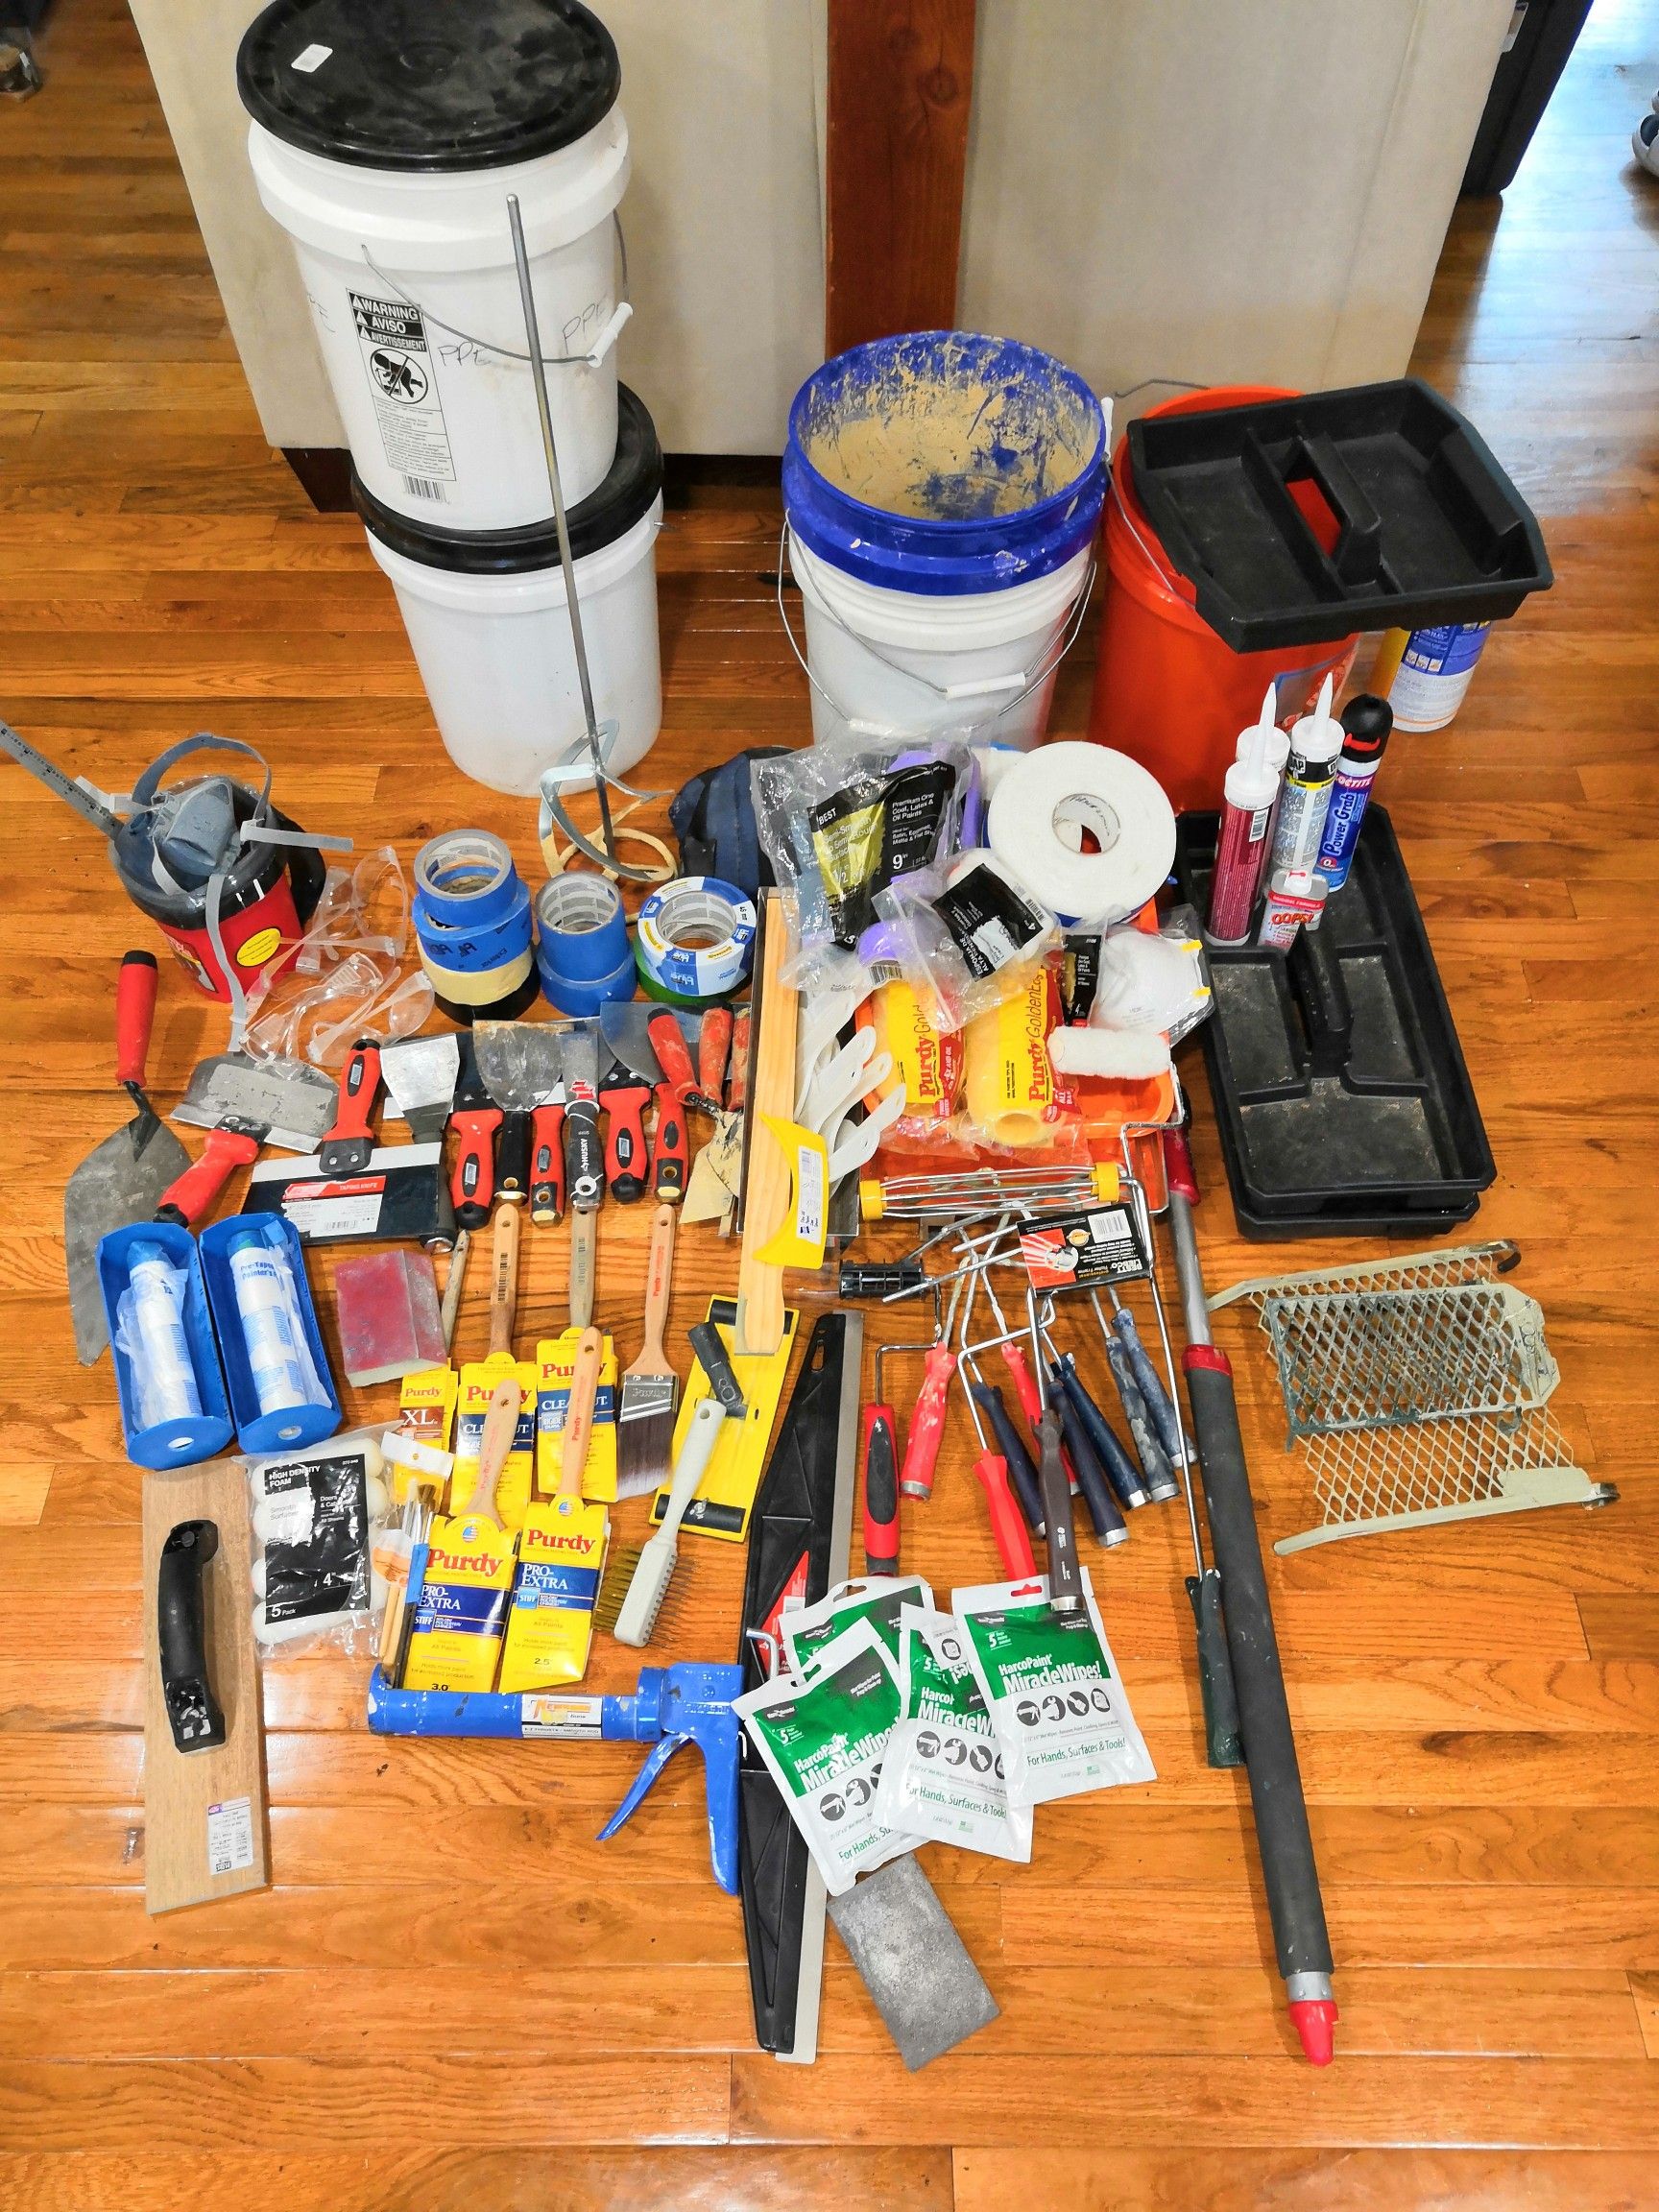 Painter / Drywall / Contractor Supplies